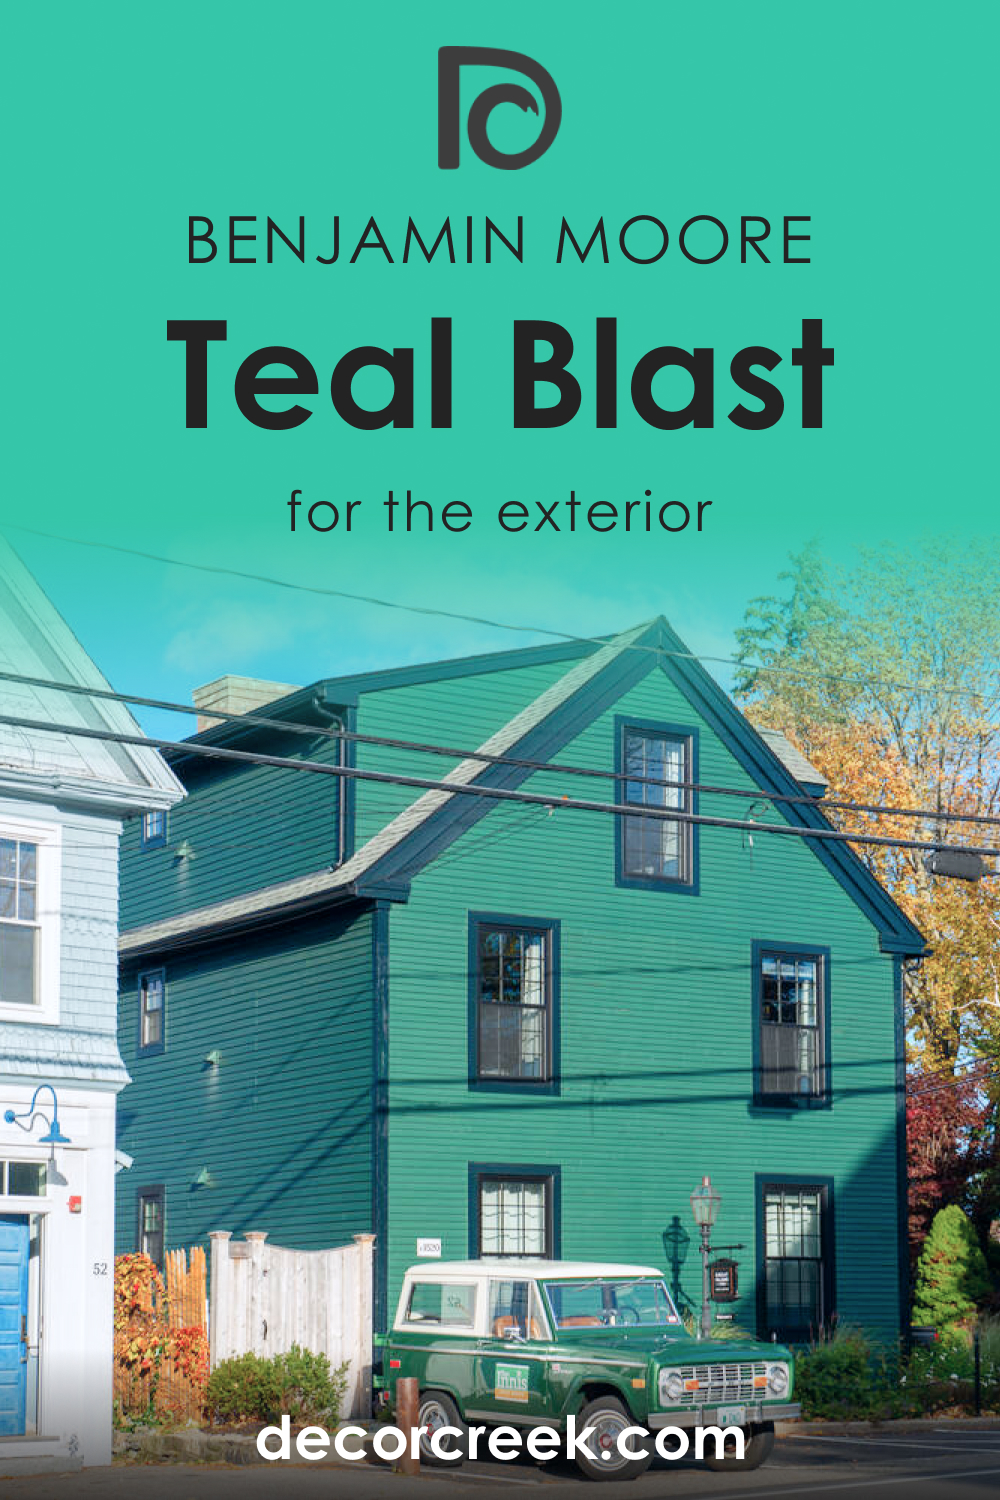 How to Use Teal Blast 2039-40 for an Exterior?